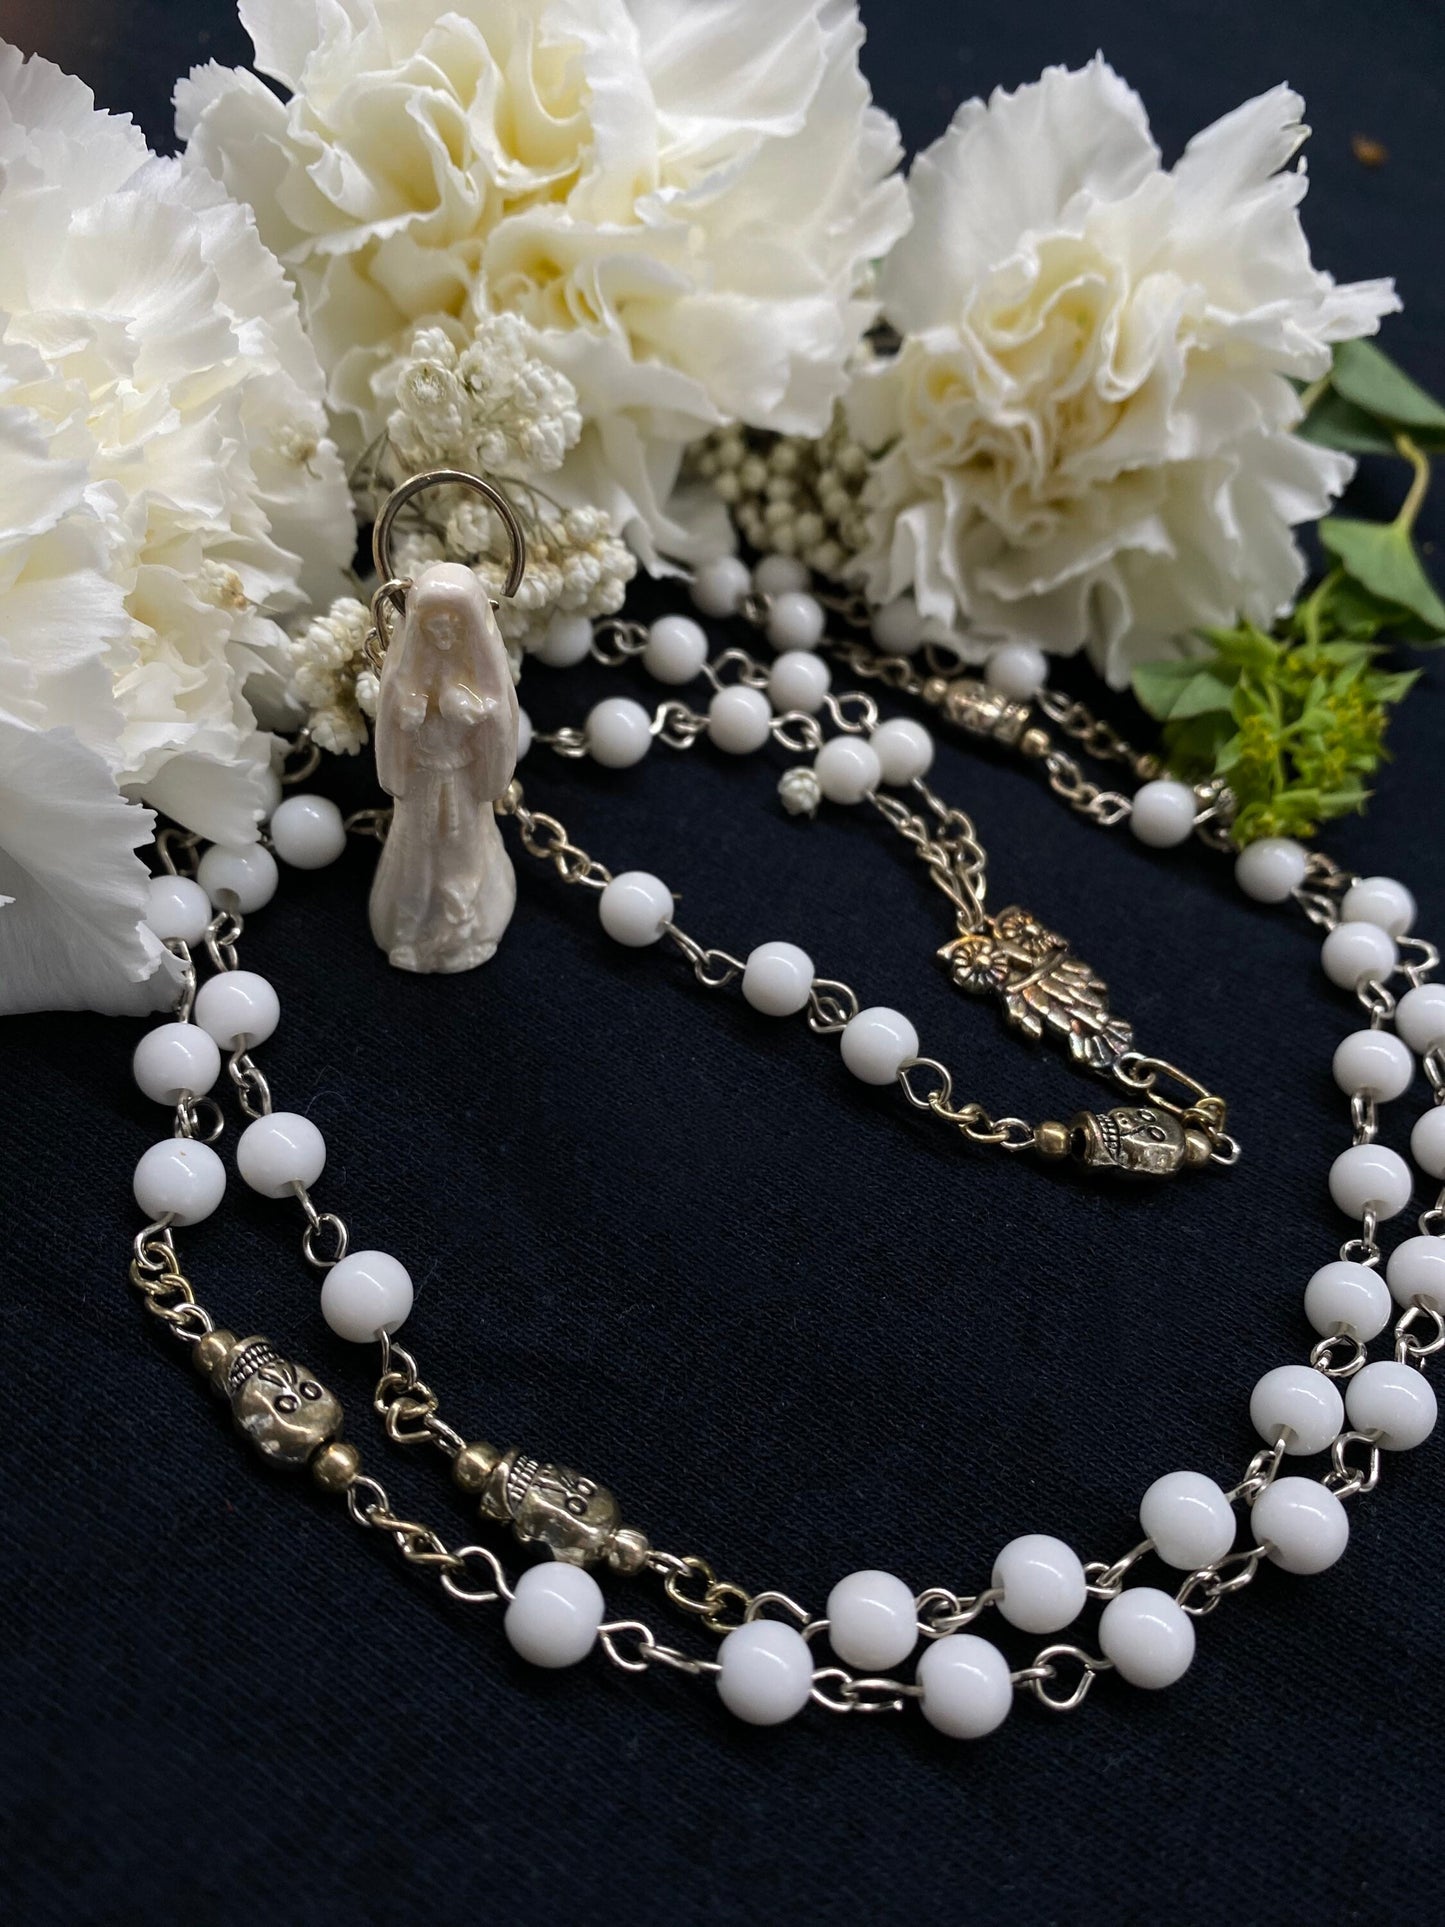 Santa Muerte Blanca Rosary + Gemstone + Blessed + Sterling Silver Plated Chain + Handcrafted + Rosario